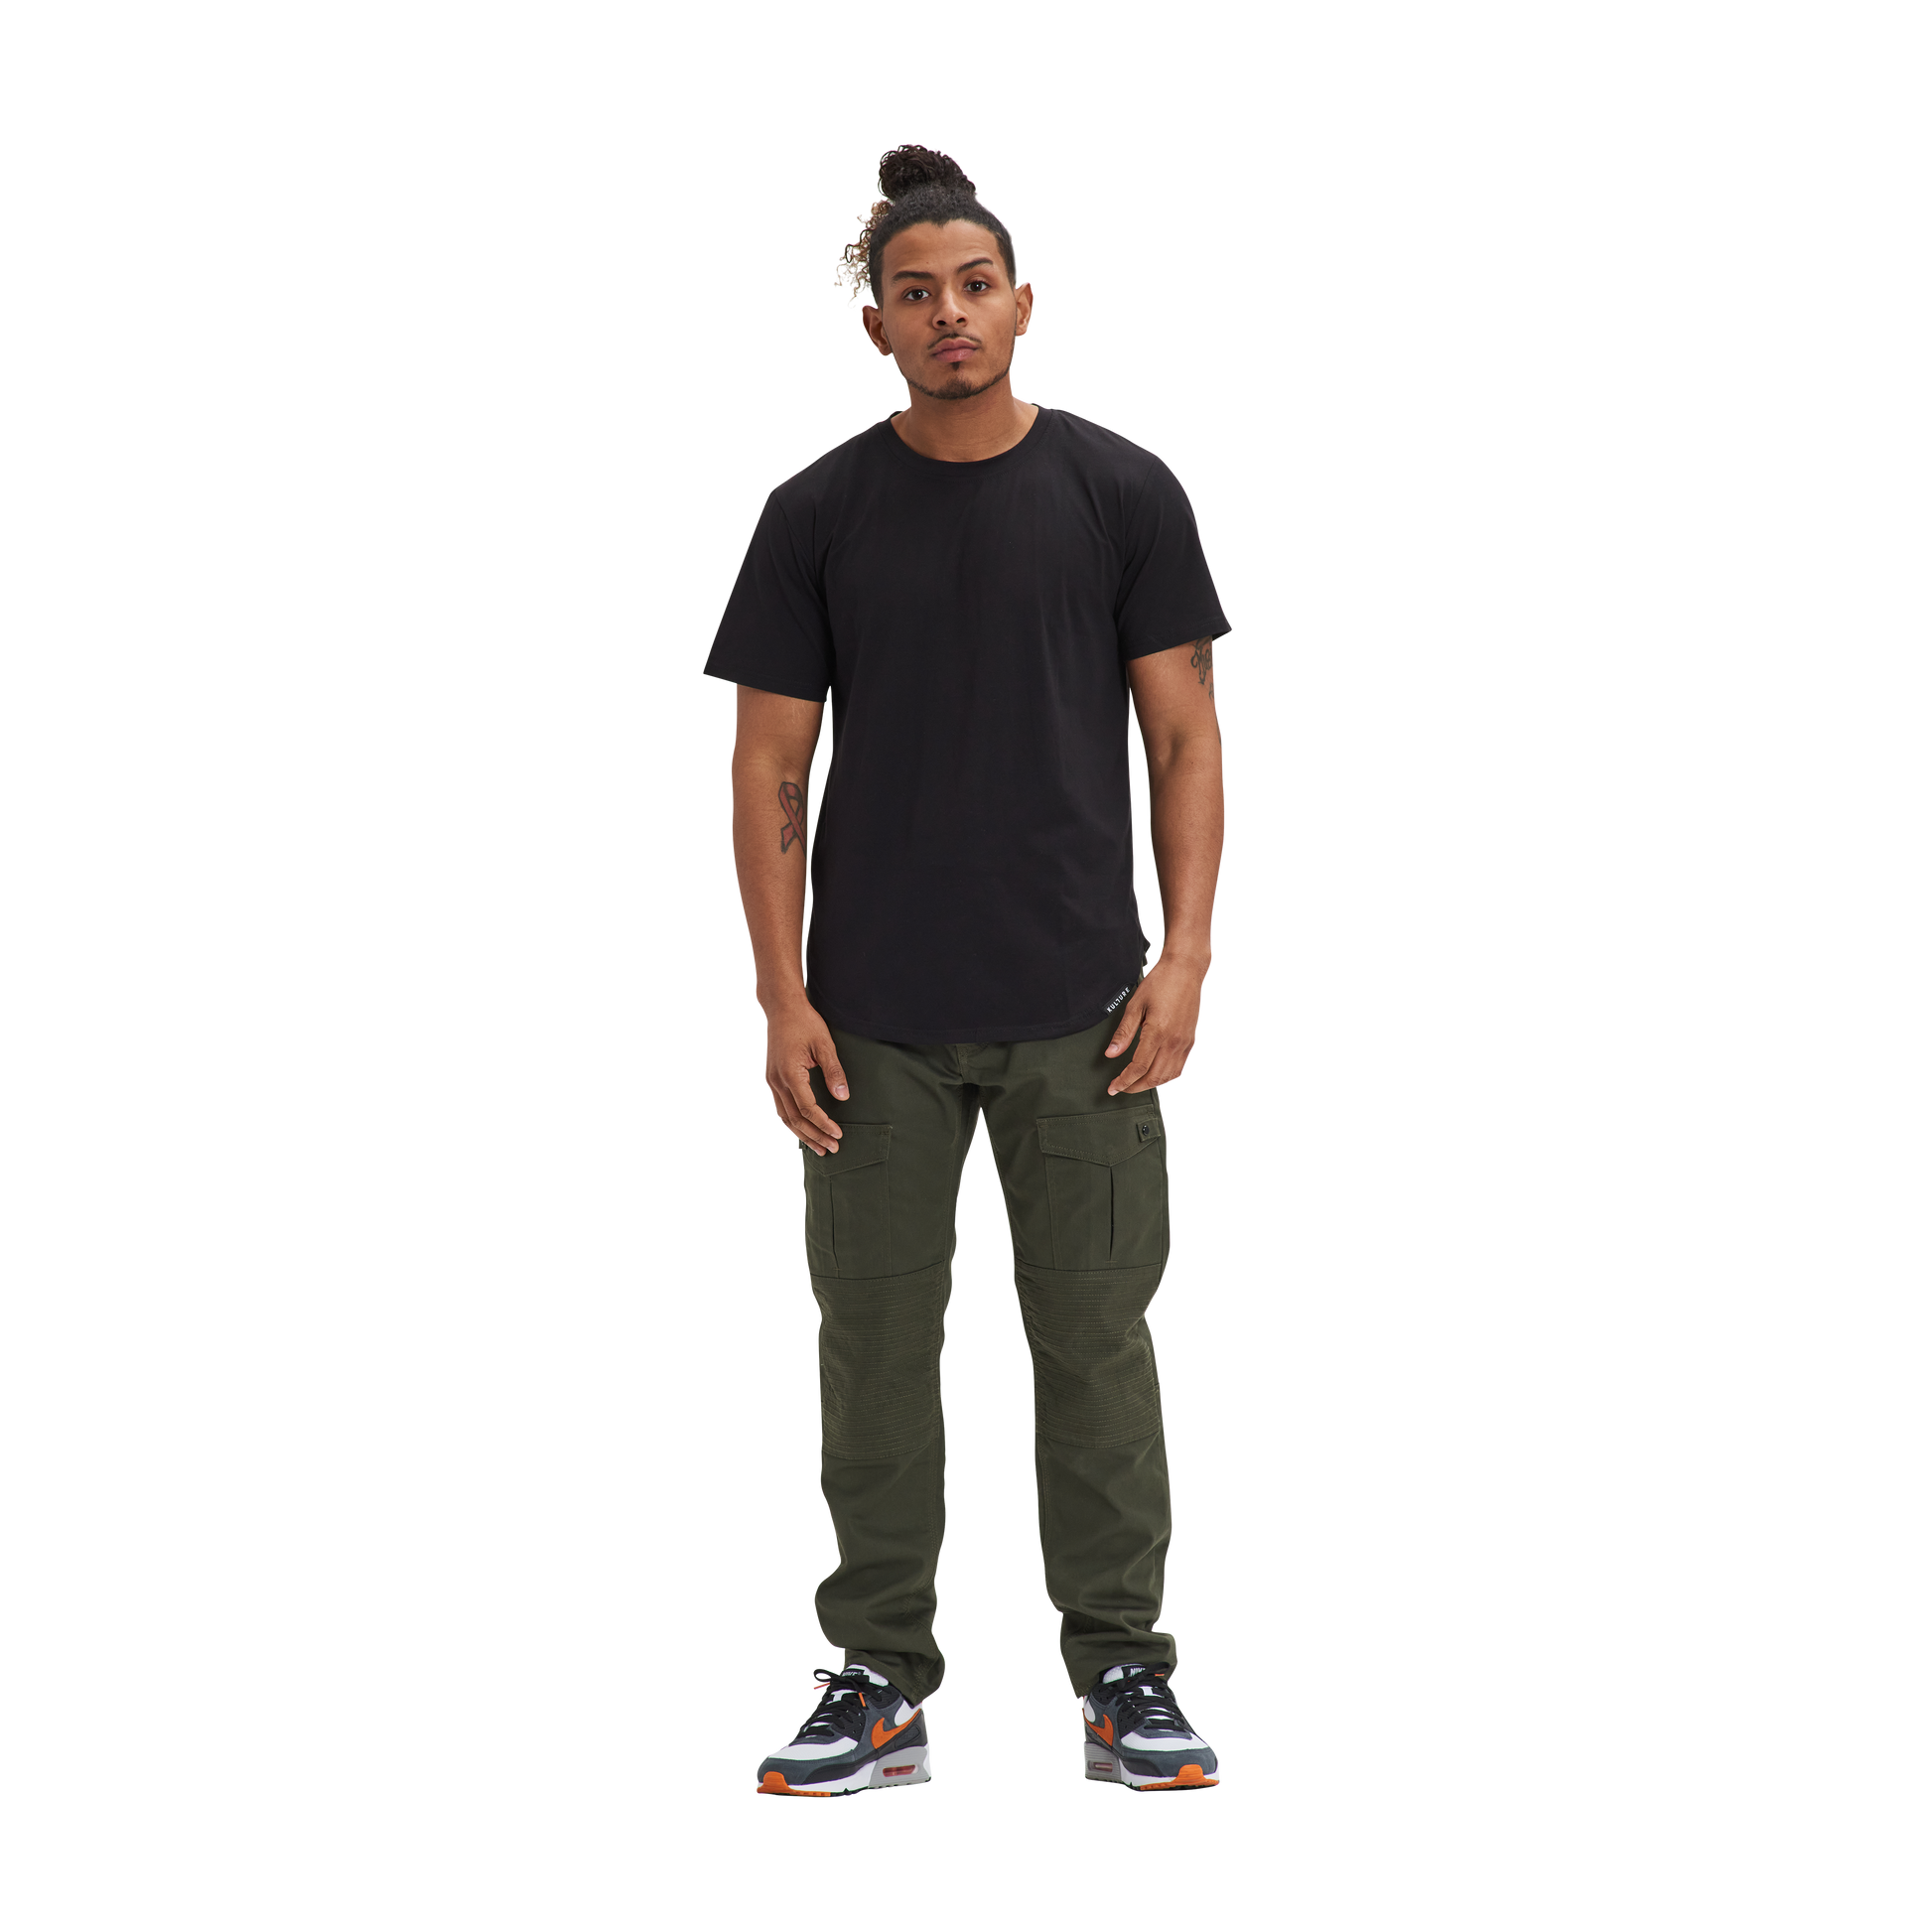 A man standing in front of a white background wearing a Kulture LAS Black Scoop Tee.